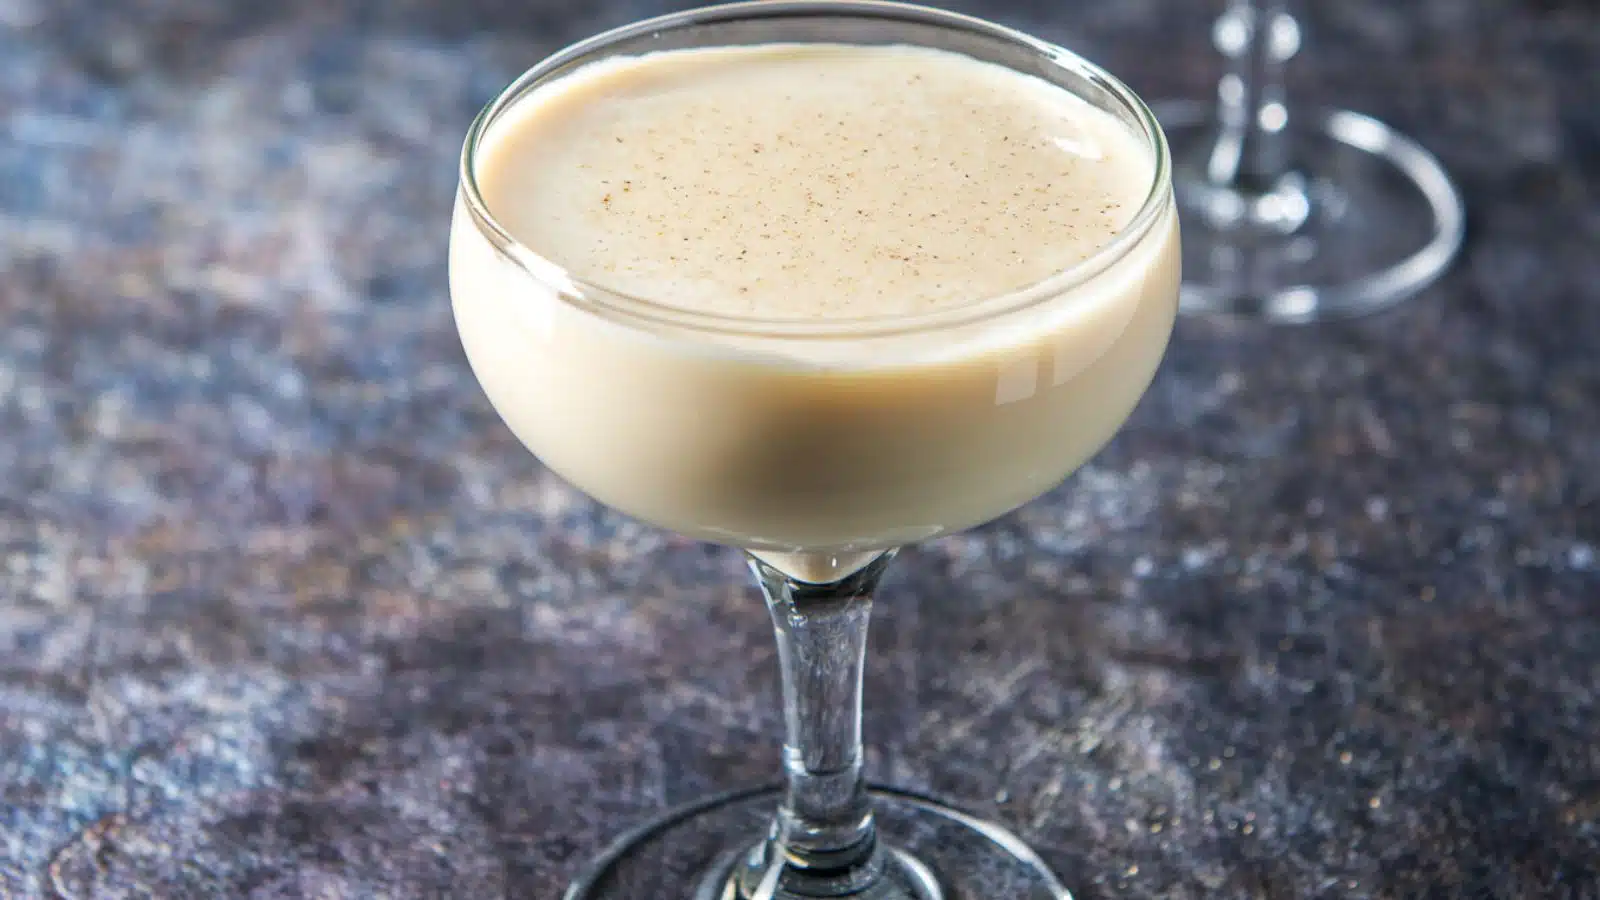 a coupe glass filled with the cream drink with nutmeg sprinkled on top